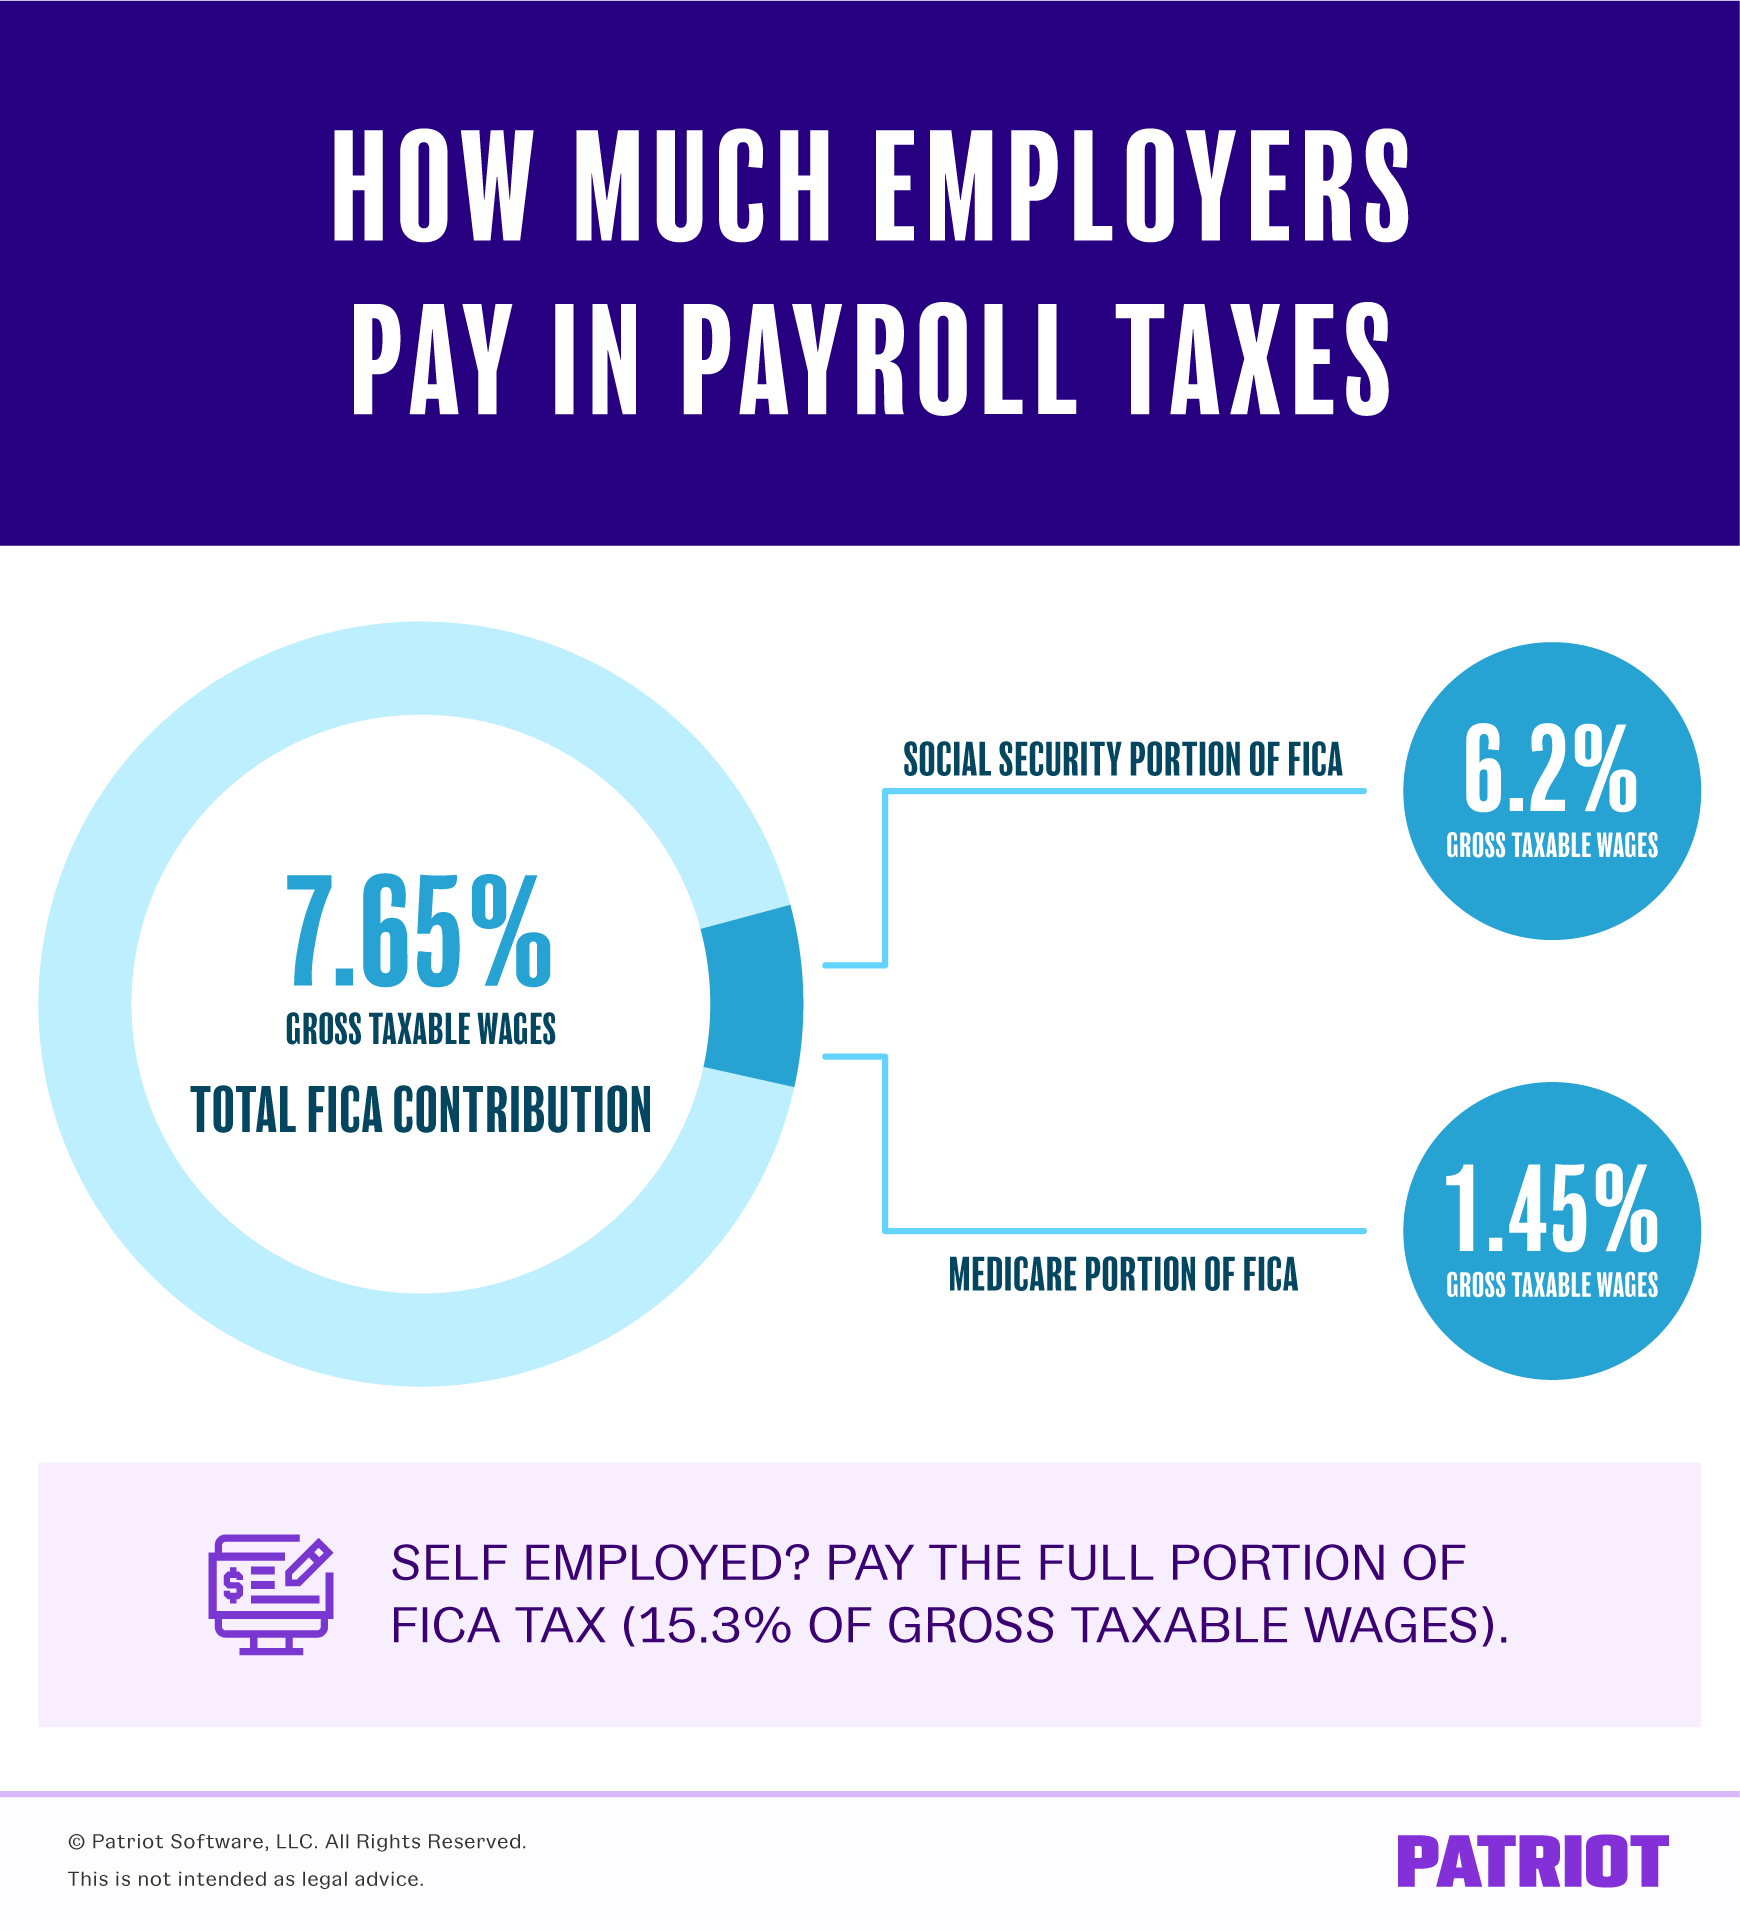 How much employers pay in payroll taxes is 7.65% of gross taxable wages for the total FICA contribution. The Social Security portion of FICA is 6.2% of gross taxable wages. The Medicare portion of FICA is 1.45% of gross taxable wages. Self-employed? Pay the full portion of FICA tax, which is 15.3% of gross taxable wages.